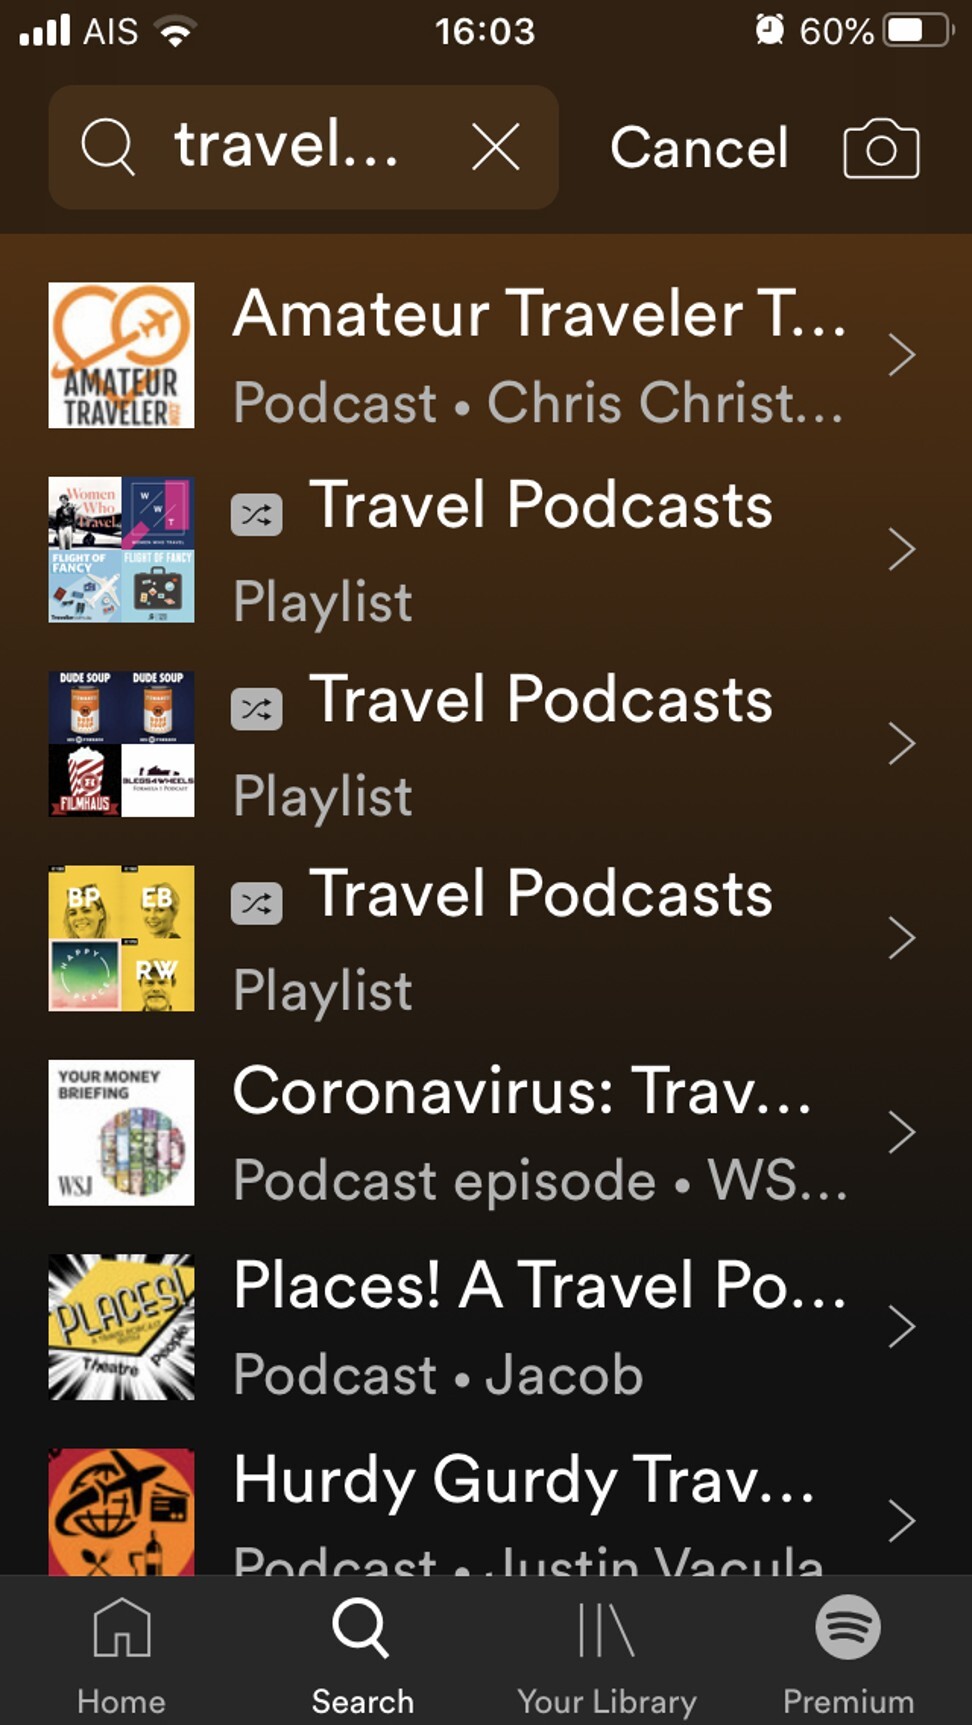 There is a large selection of travel podcasts, so choose your niche carefully.